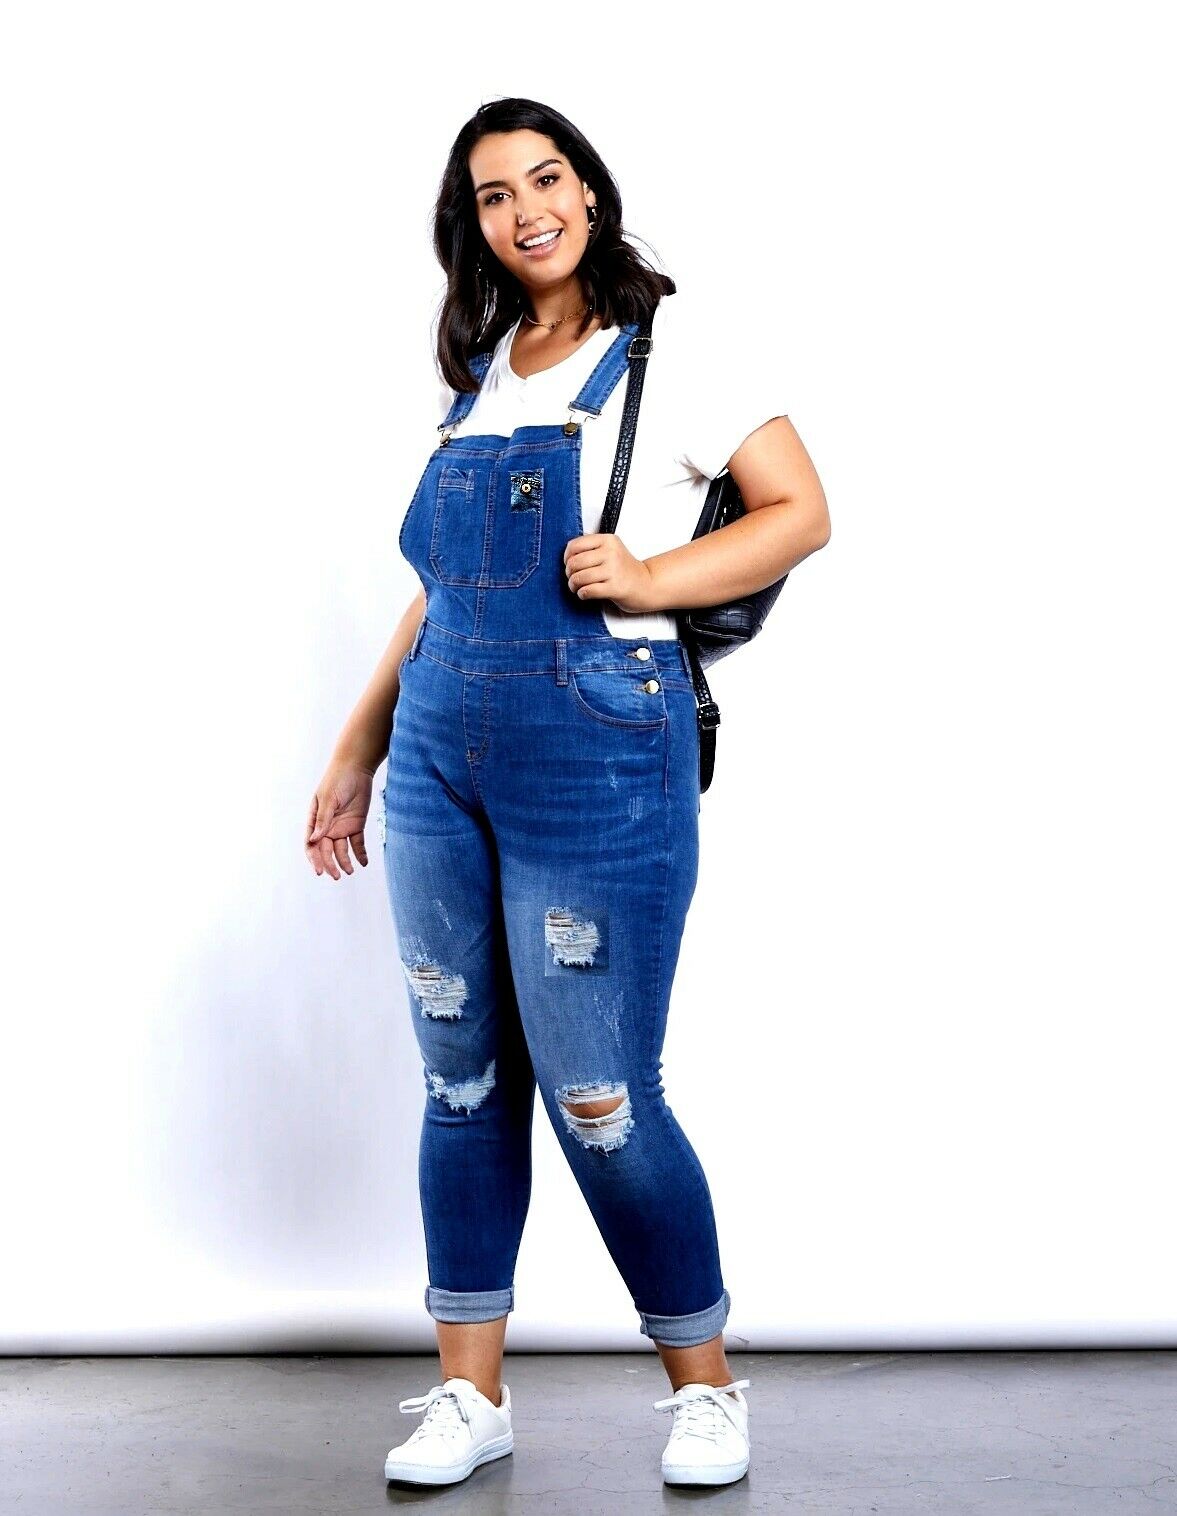 Women's Plus Size Long Overalls Jumpsuit Distressed Stretch Denim Jeans - image 4 of 4